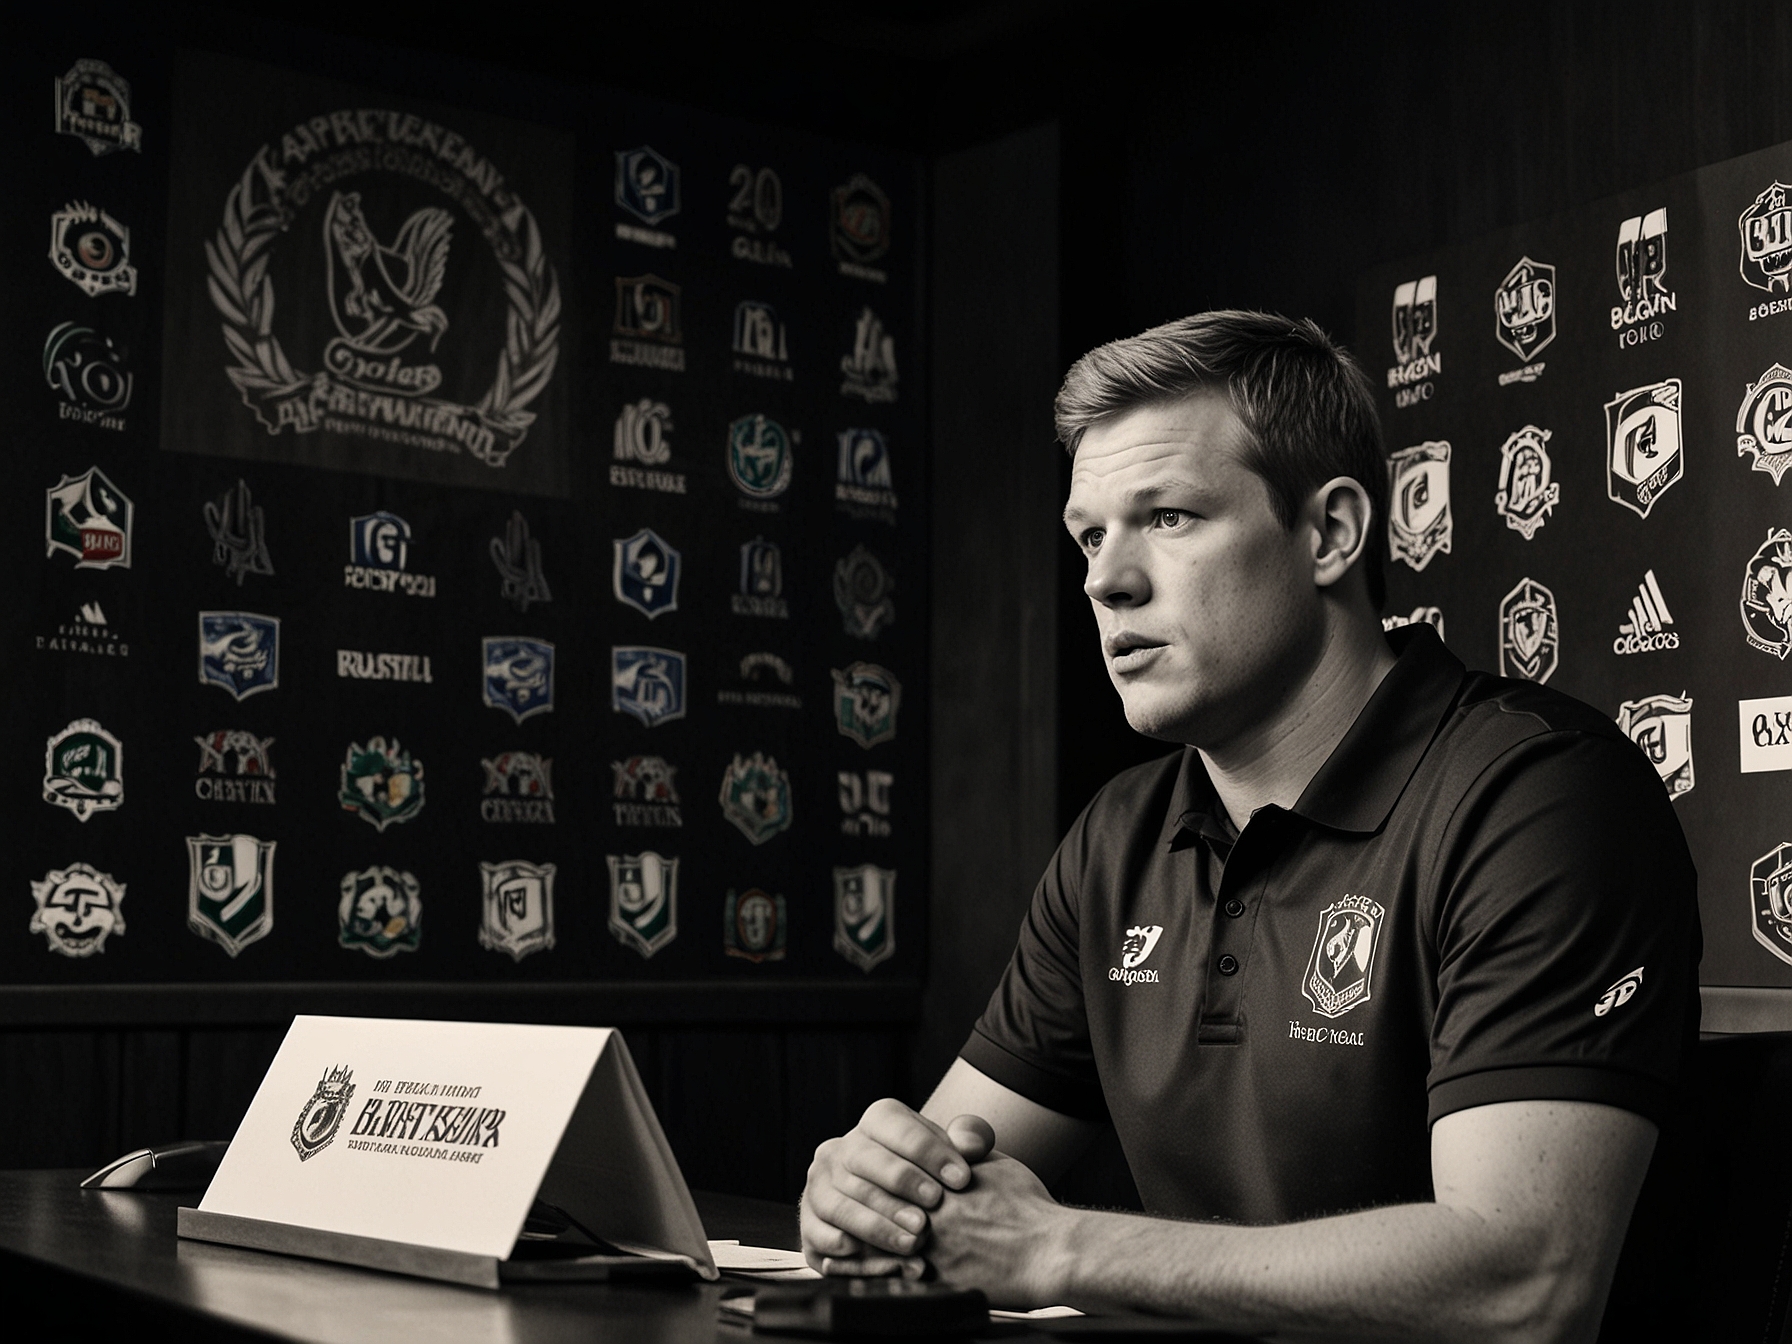 David Miller addressing a press conference, confidently speaking to dismiss the retirement rumors, with the South African national team logo in the background.